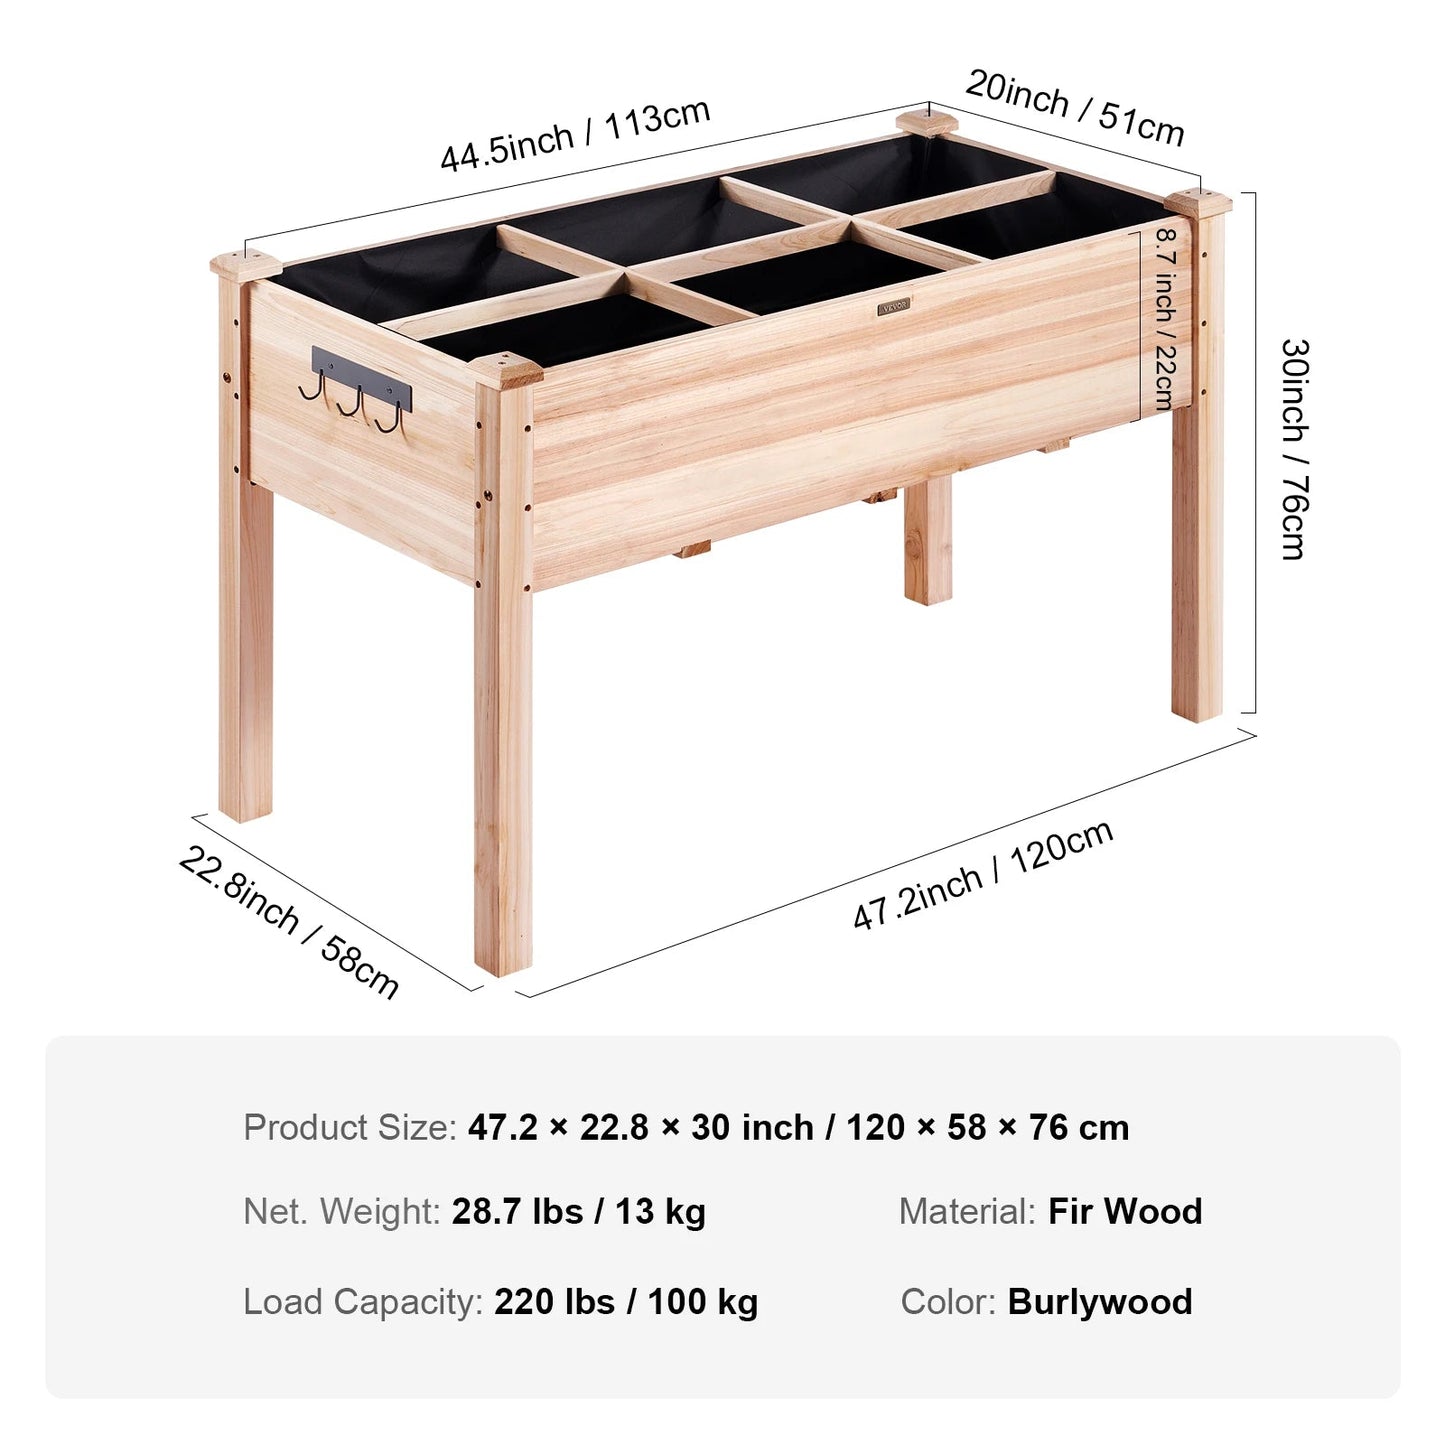 Wooden Raised Garden Bed Planter Box - The Accessibility Shop